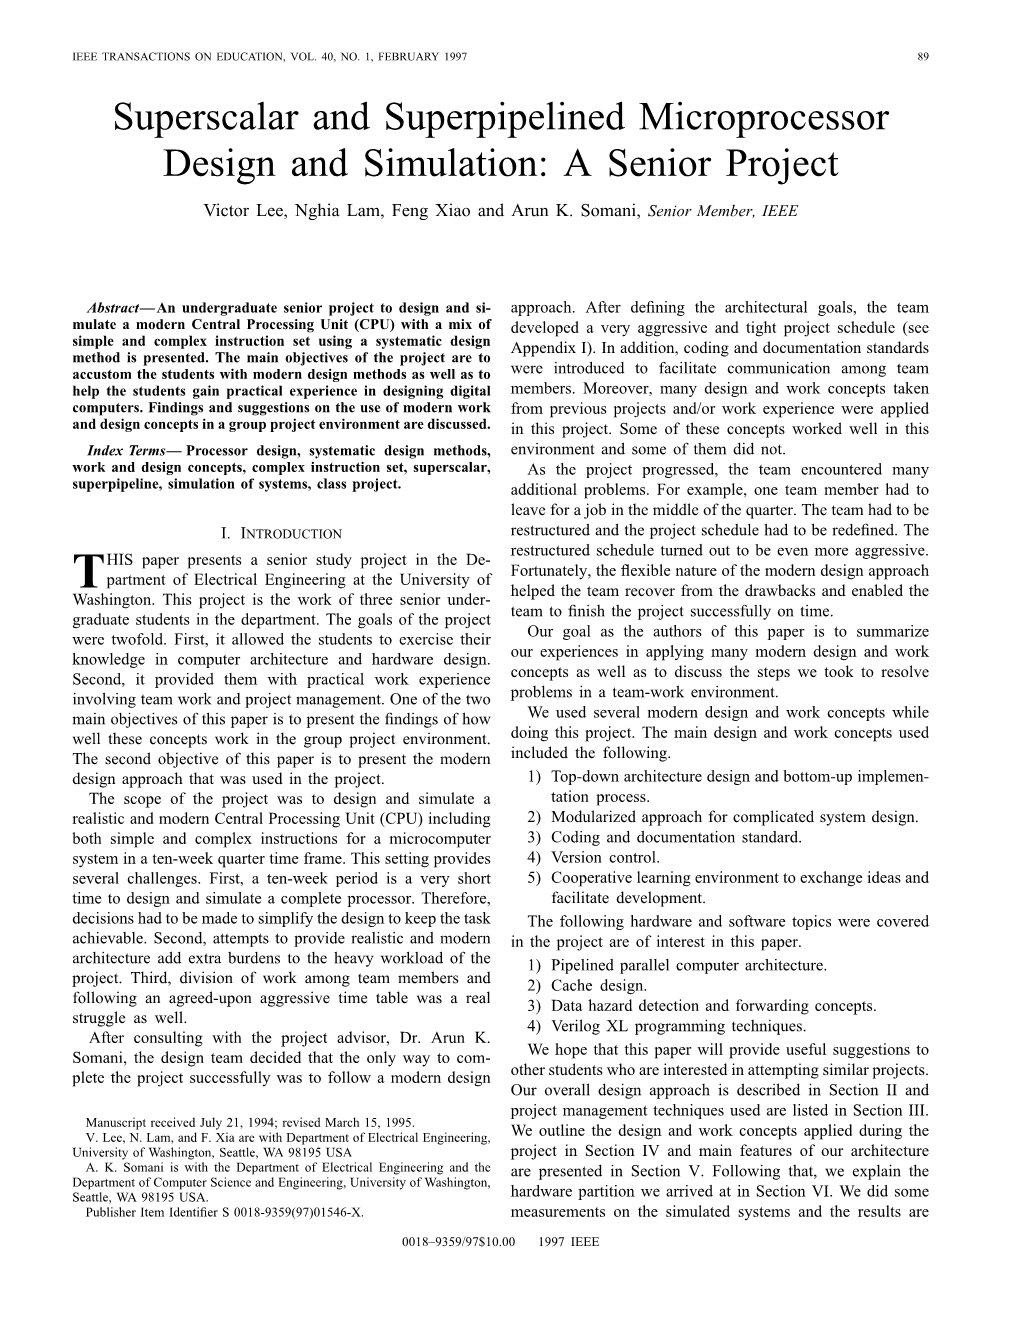 Superscalar and Superpipelined Microprocessor Design and Simulation: a Senior Project